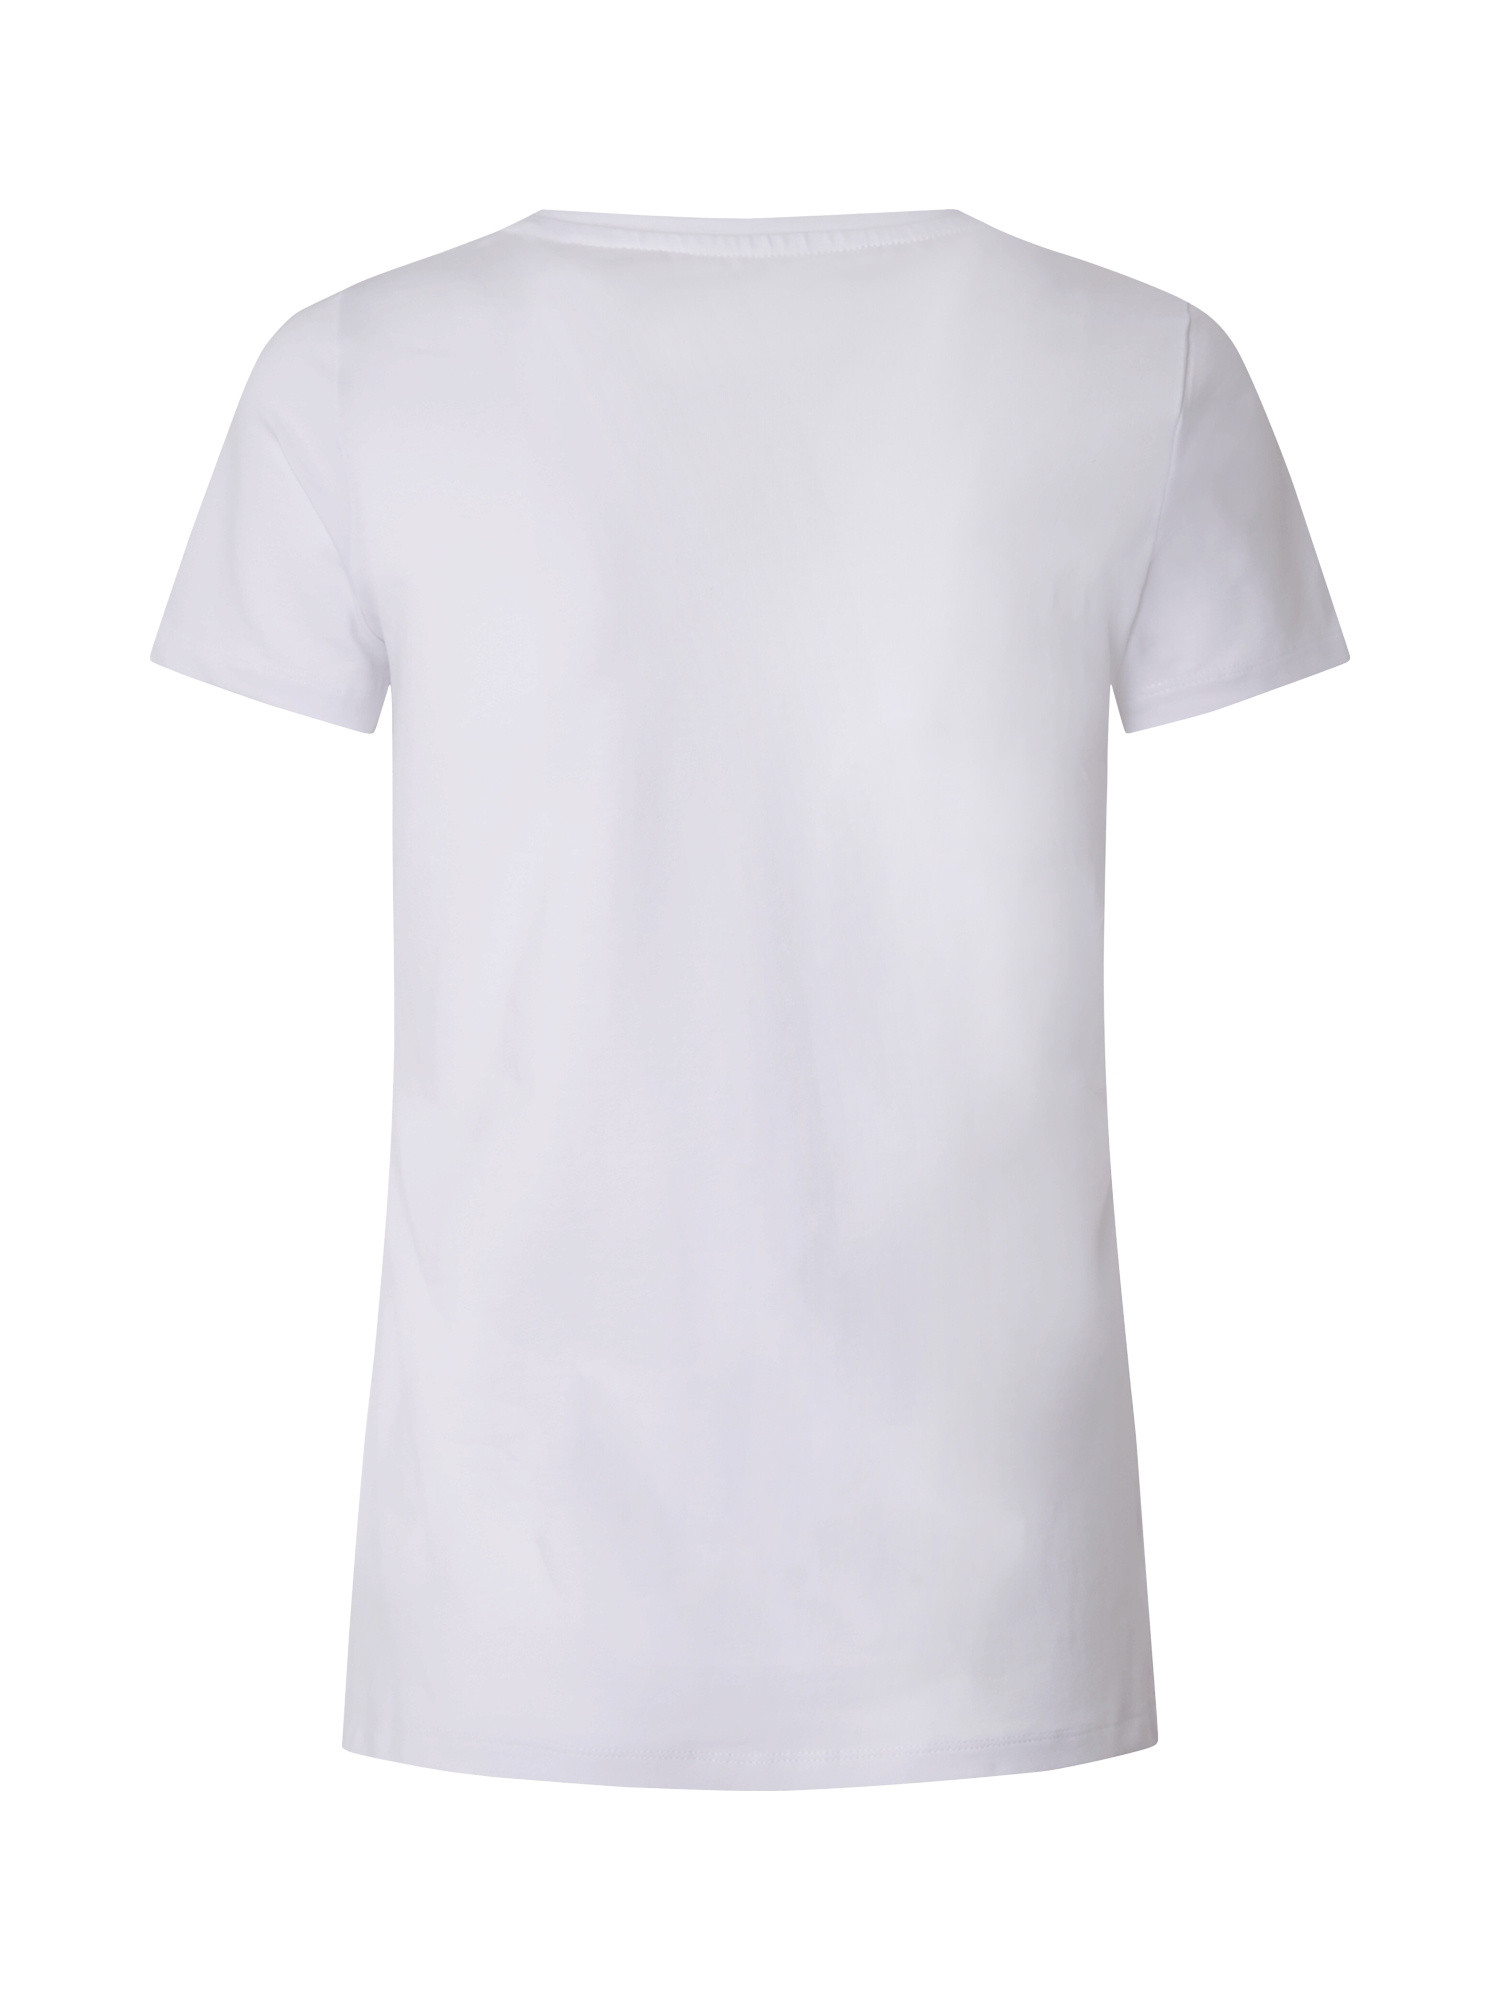 Pepe Jeans - T-shirt con stampa, Bianco, large image number 1